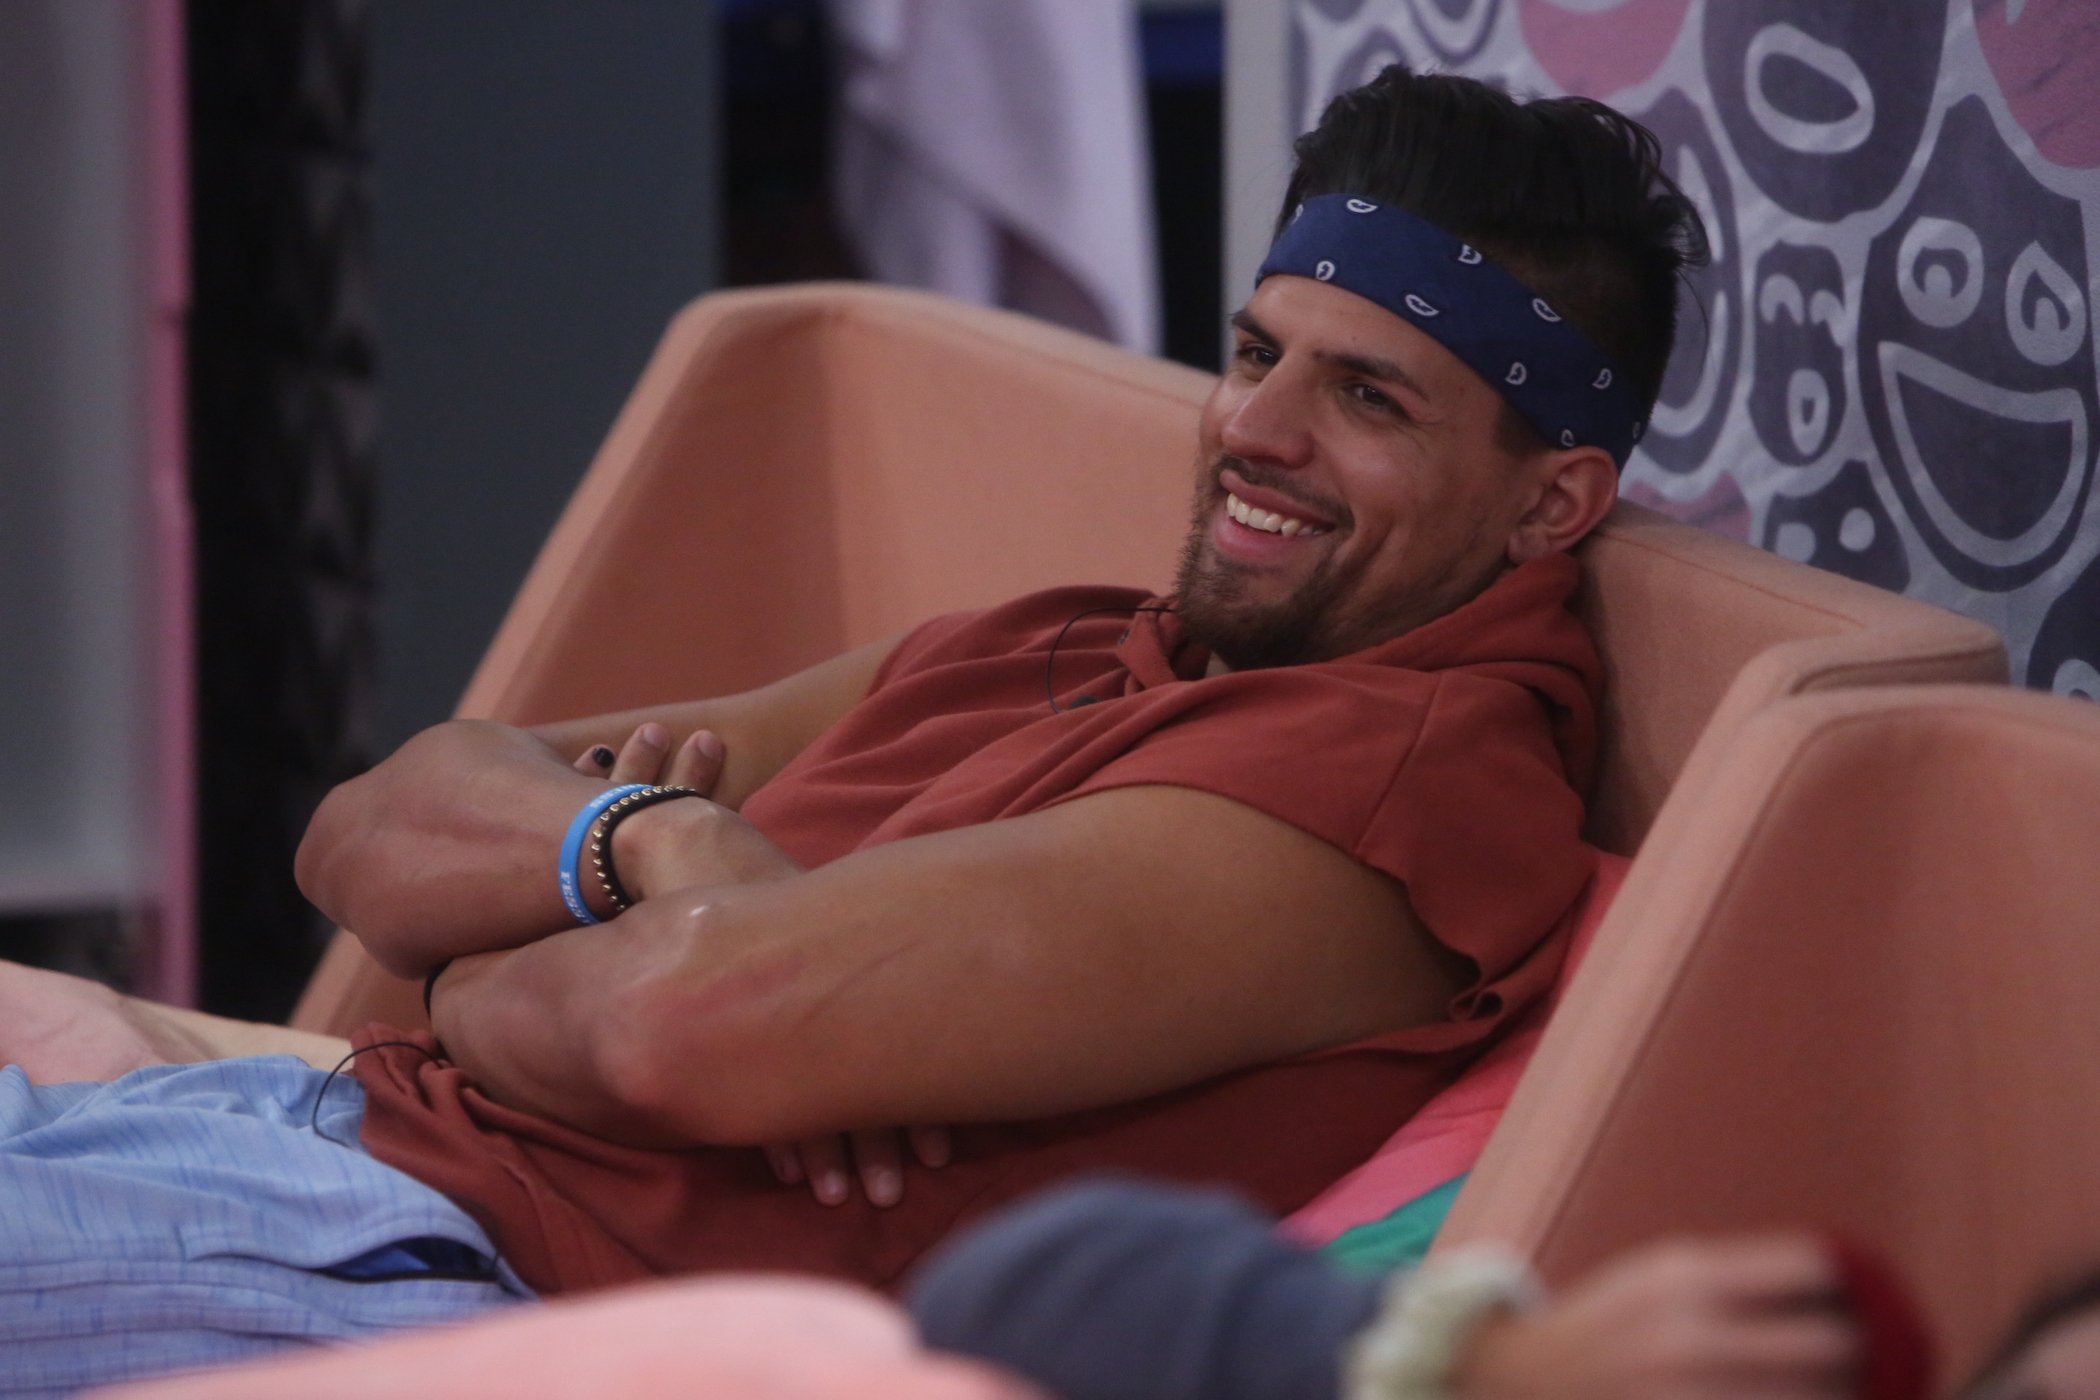 Fessy Shafaat from 'The Challenge' Season 37 on a couch with his arms crossed on 'Big Brother'